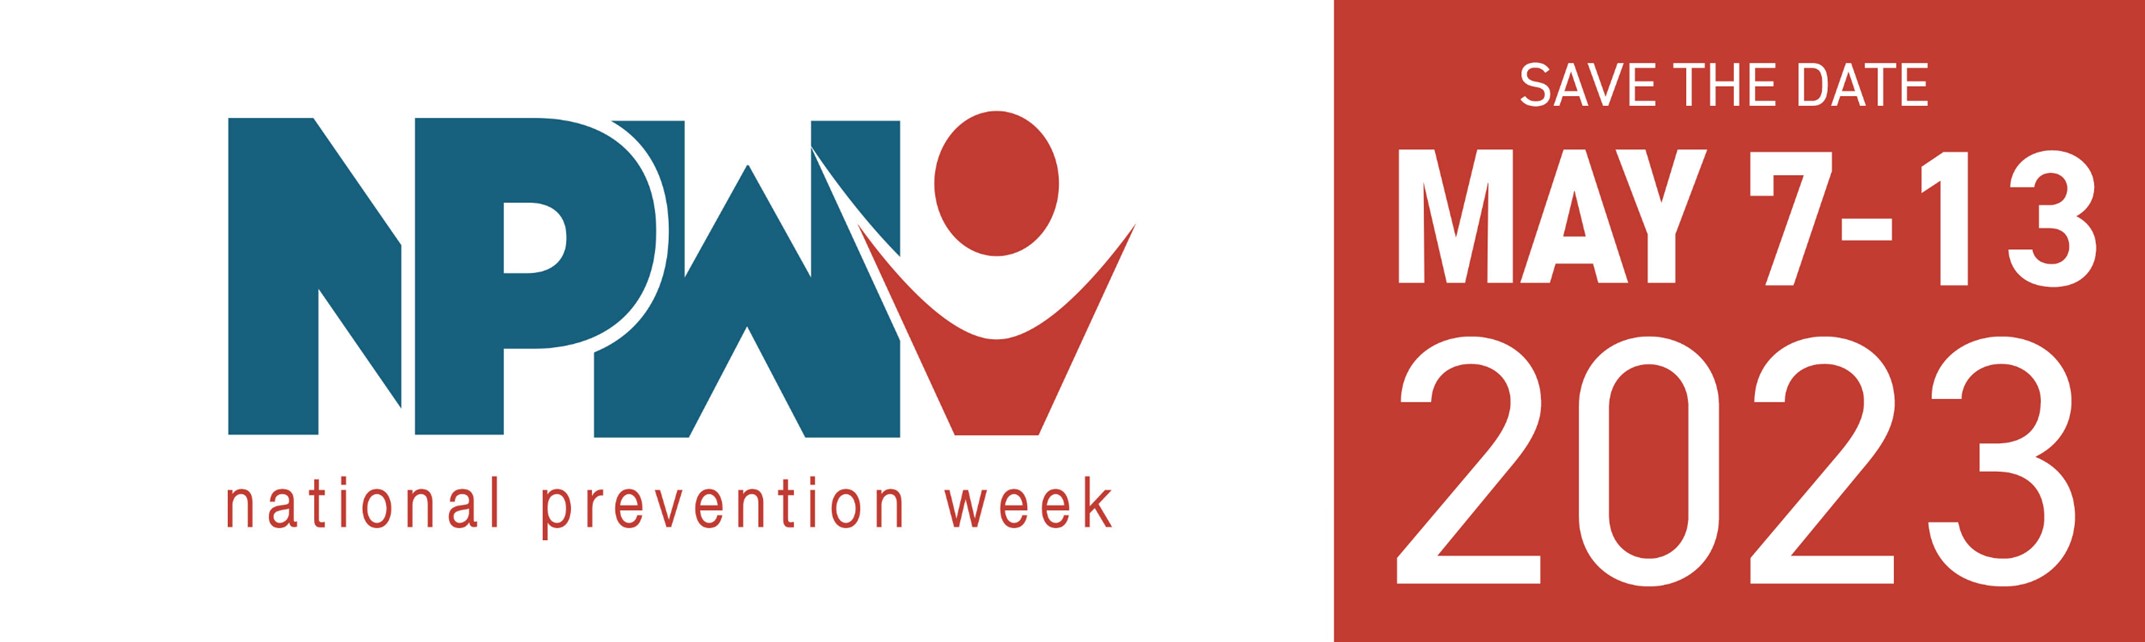 NPW National Prevention Week Save The Date May 7-13 2023